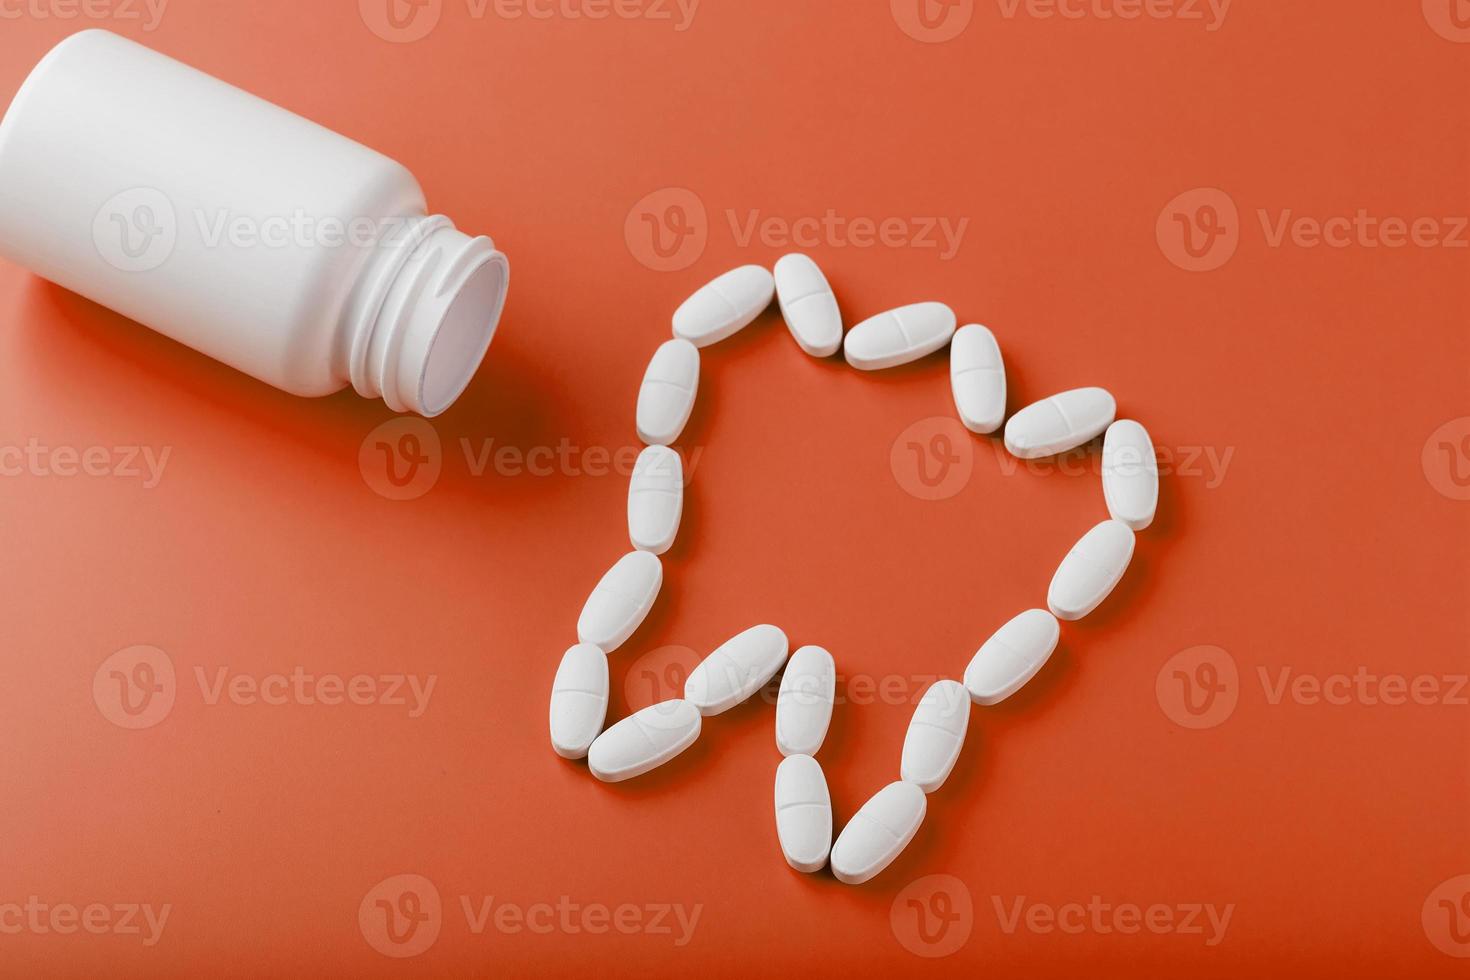 Calcium vitamin in the form of a tooth spilled out of a white jar on a red background. photo